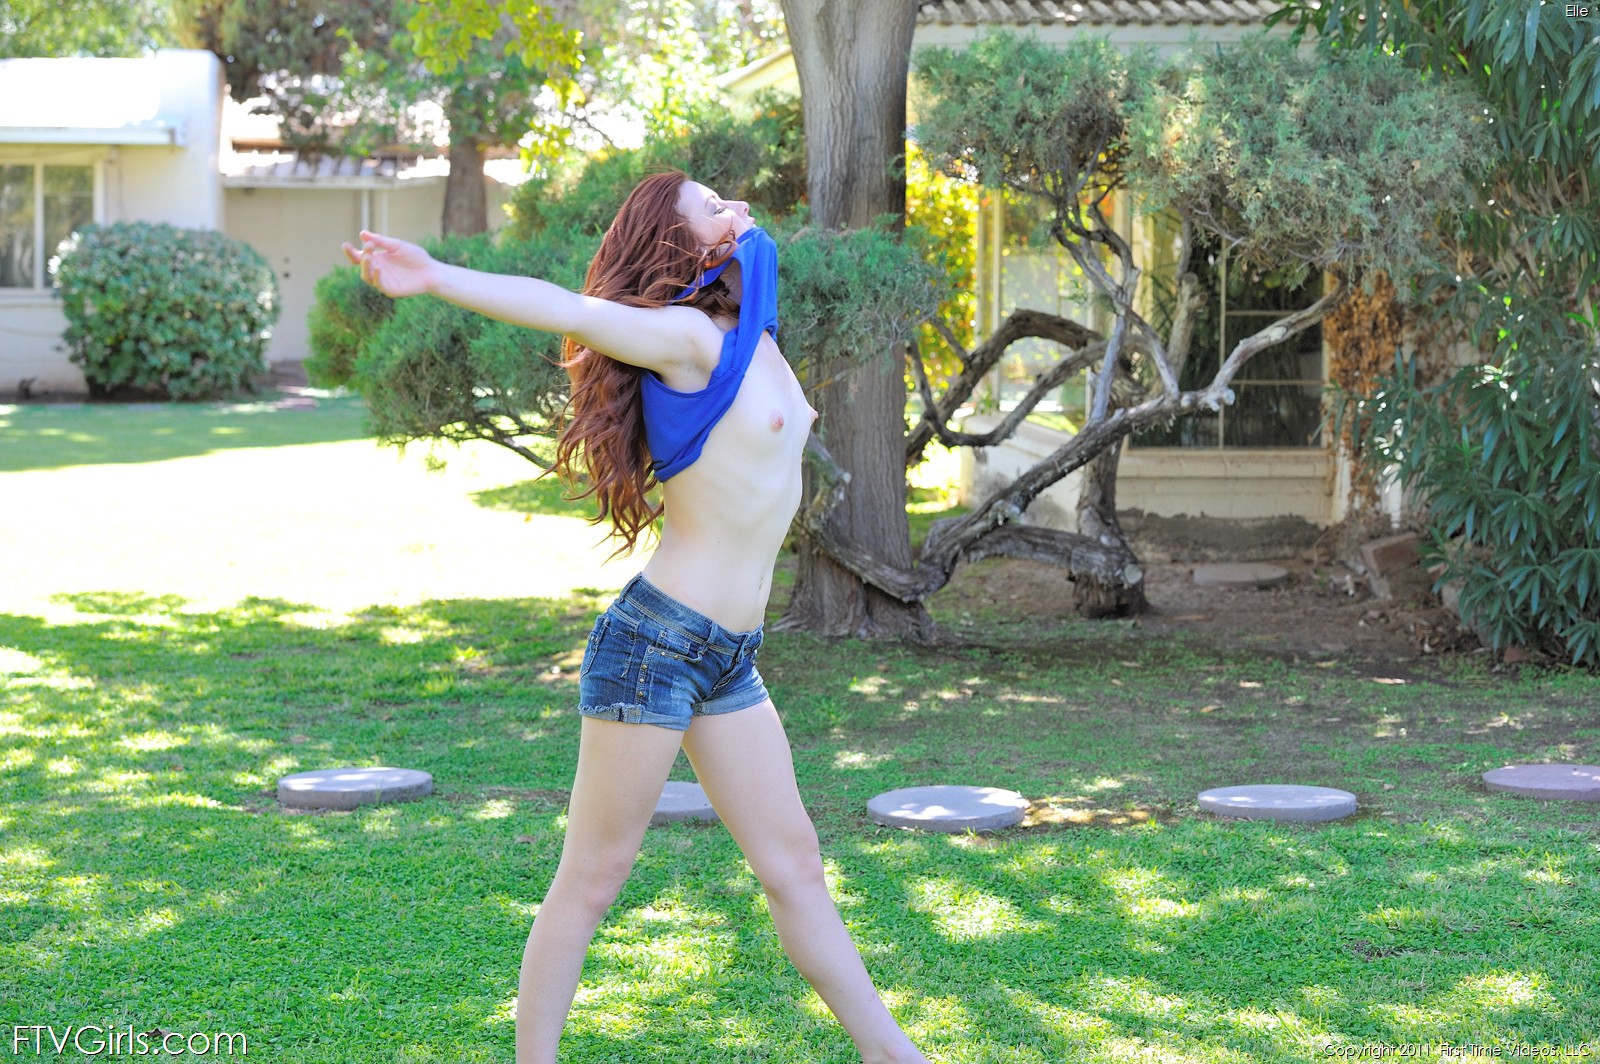 Elle Alexandra in Redheads have more fun - Flexible One photo 54 of 82